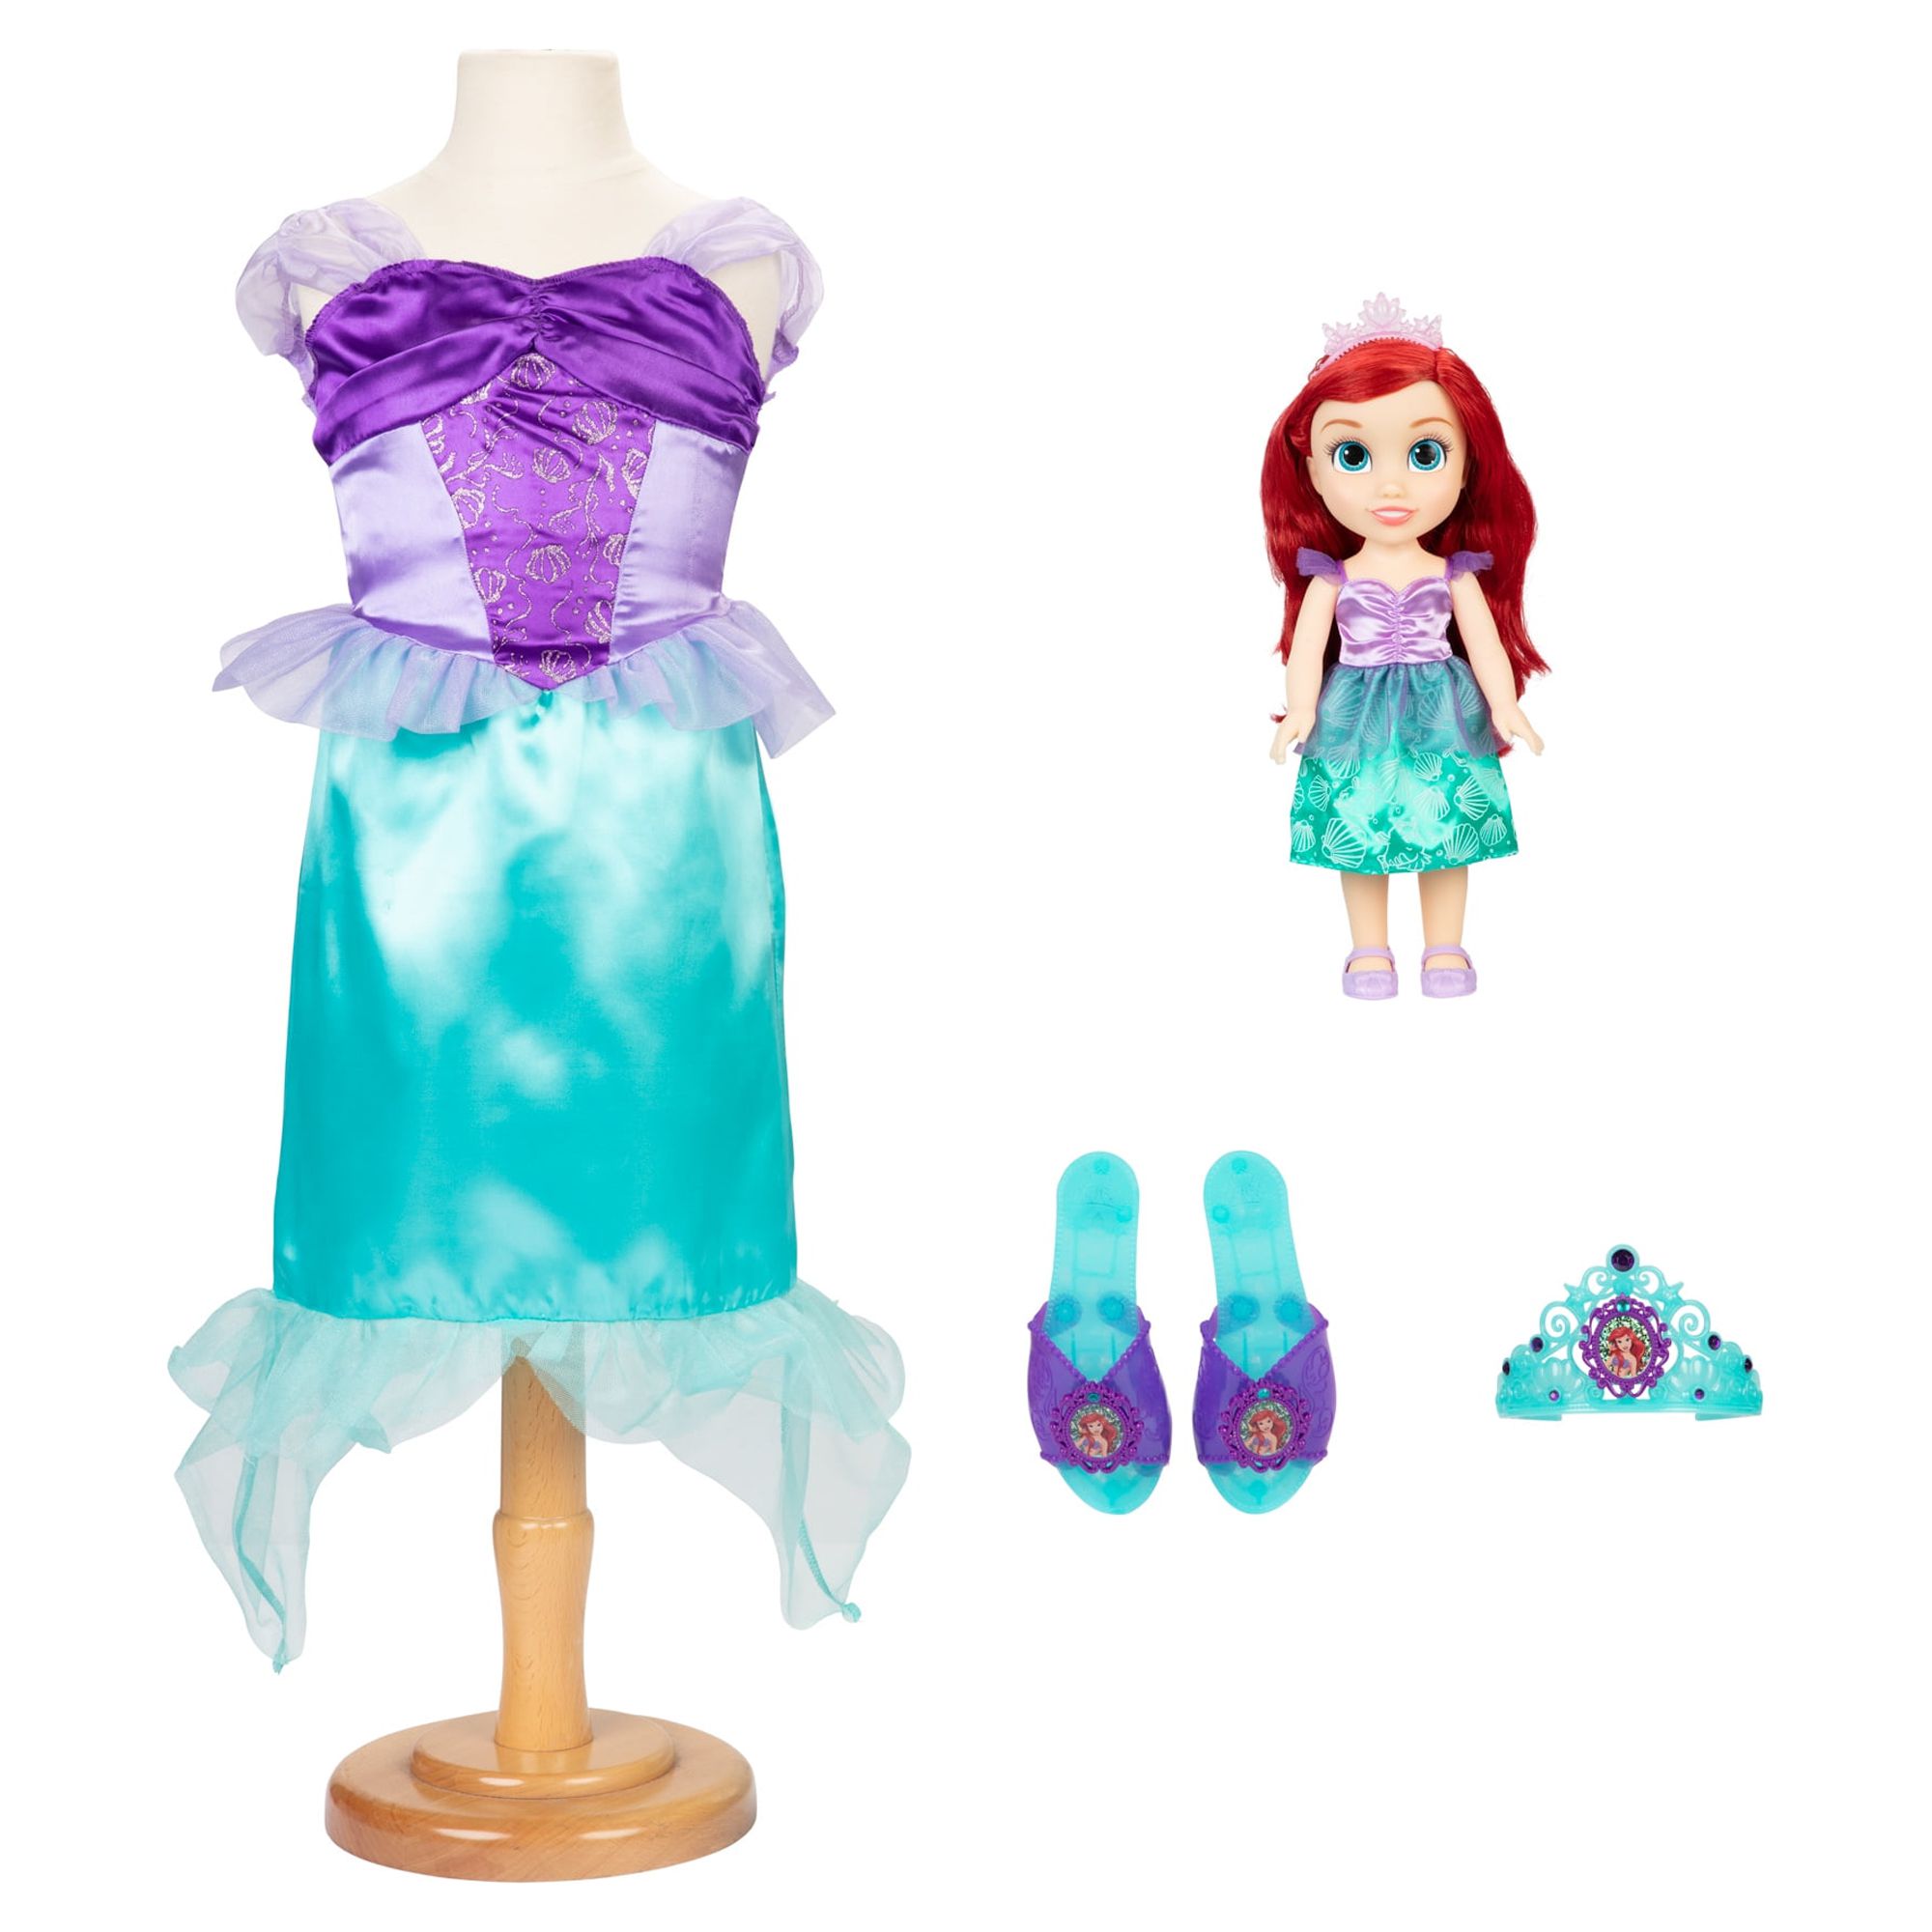 Disney Princess Ariel Toddler Doll with Child Size Dress and Accessories - image 5 of 8